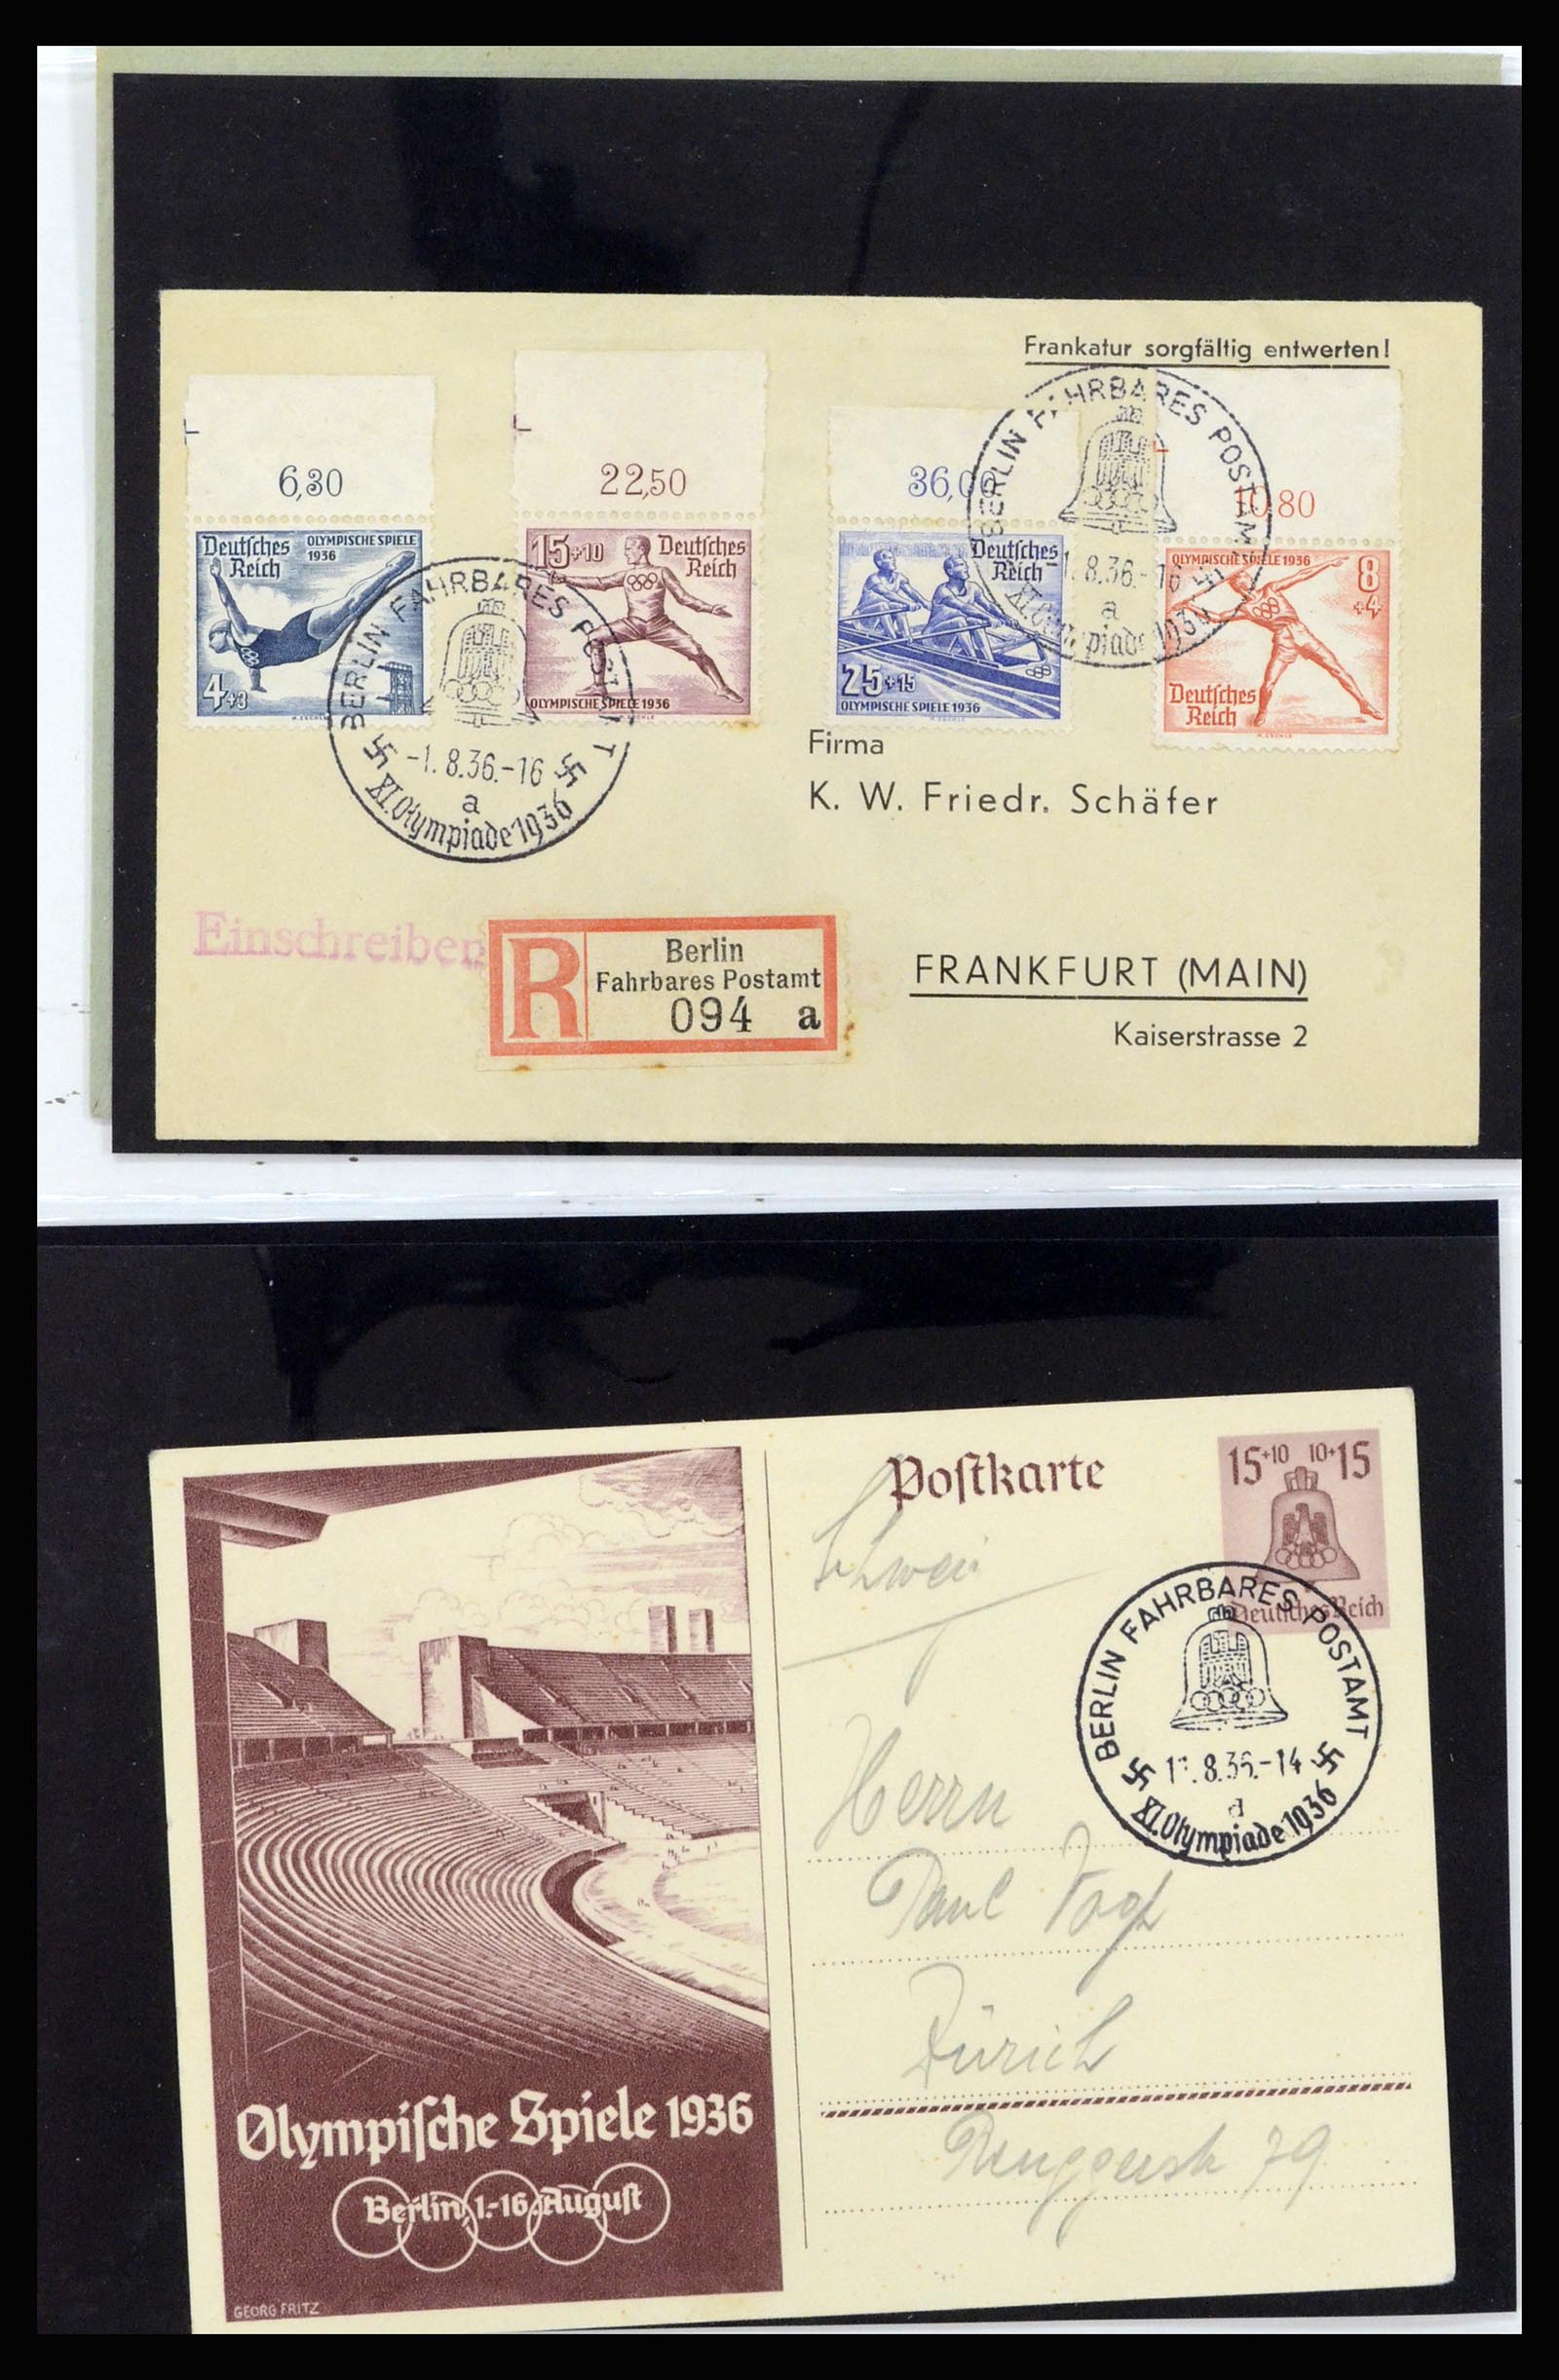 37118 093 - Stamp collection 37118 Olympics 1936.